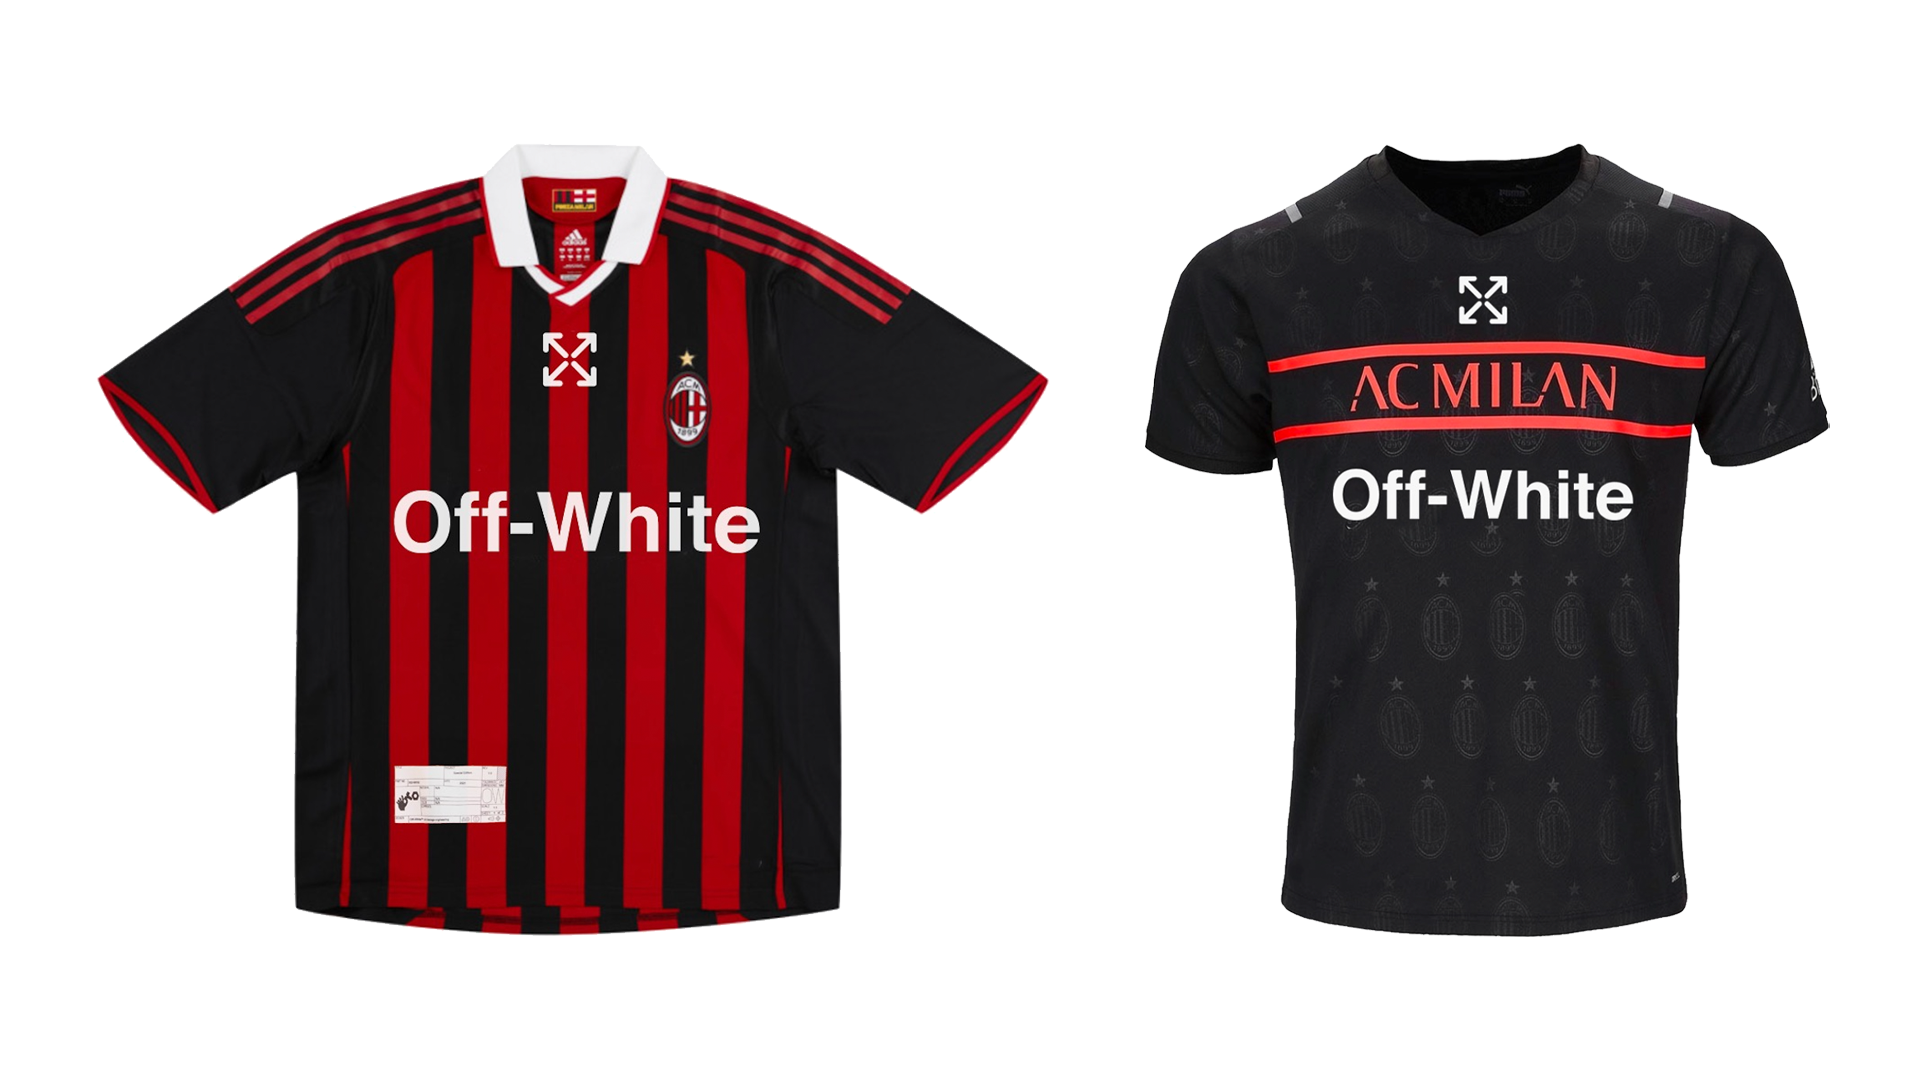 Off-White Rumoured to Team Up with AC Milan for Football